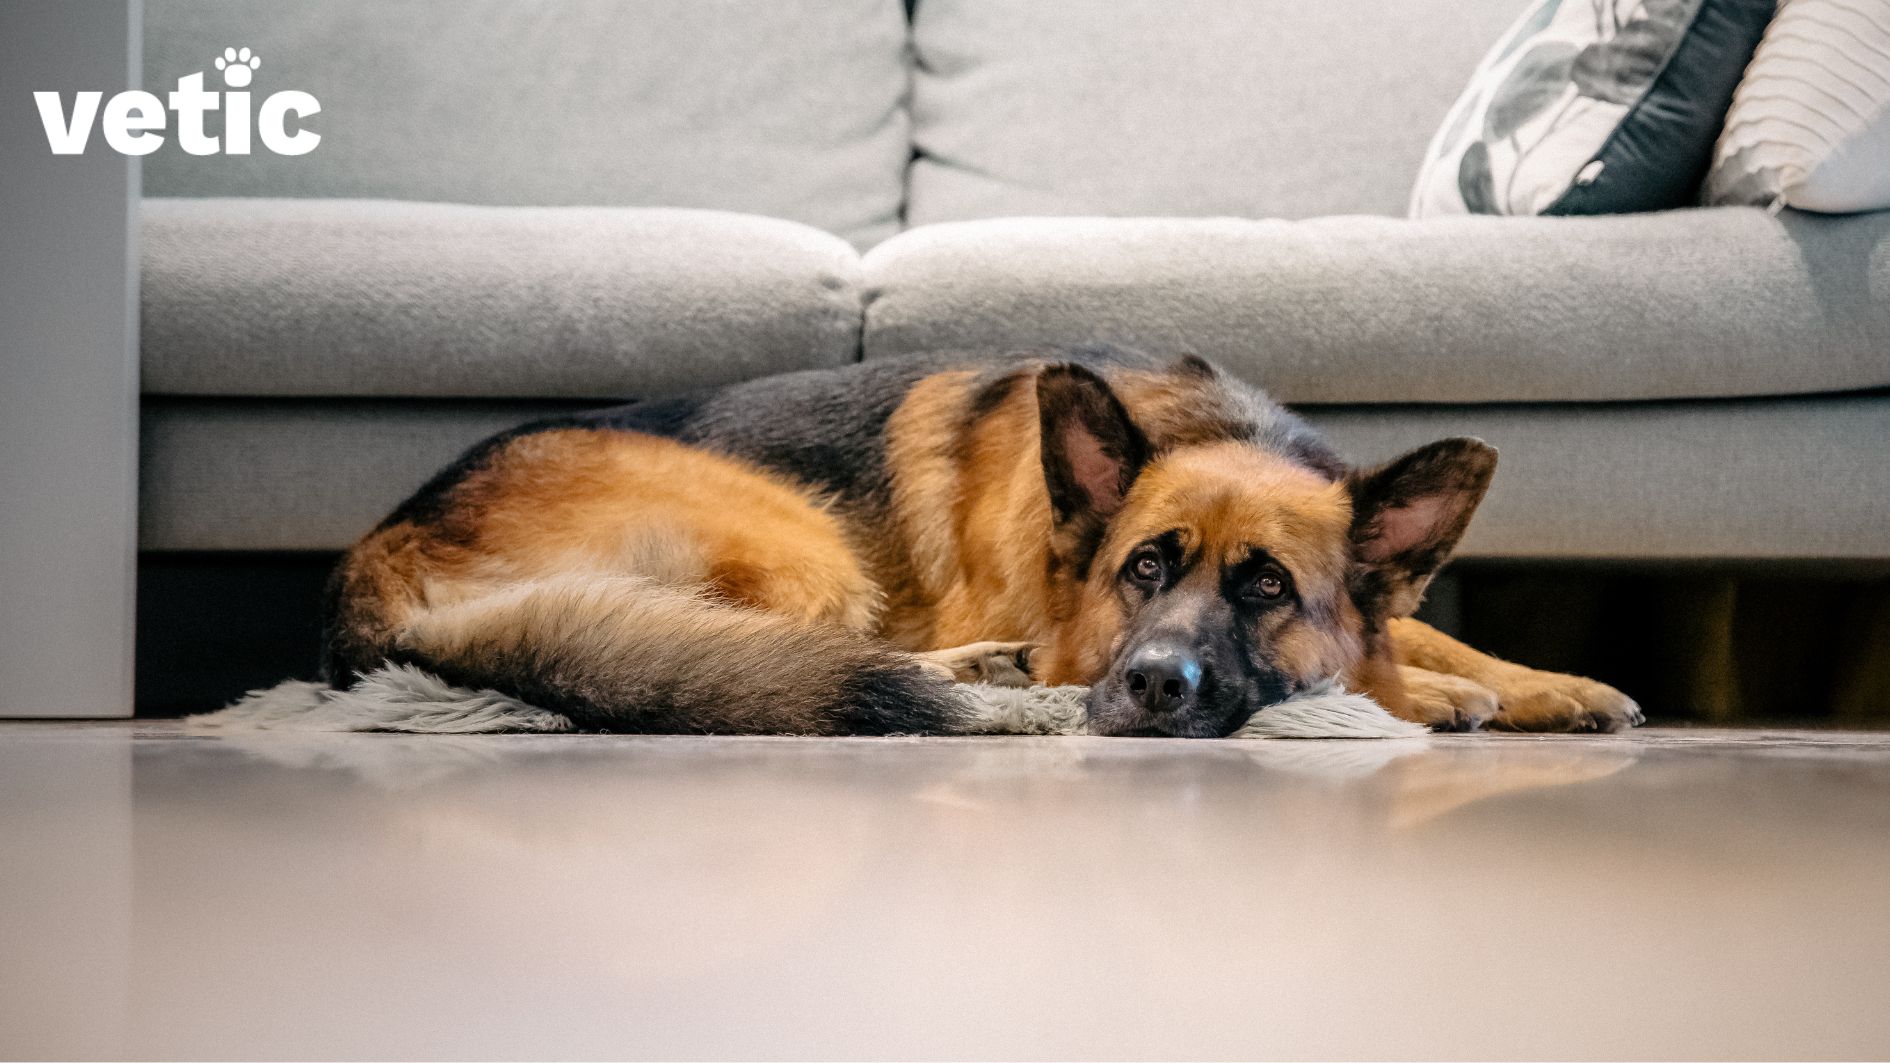 A black and tan adult German Shepherd lying curled up on a rug. A grey couch with two cushions is visible in the background. The dog looks solemn and inactive.